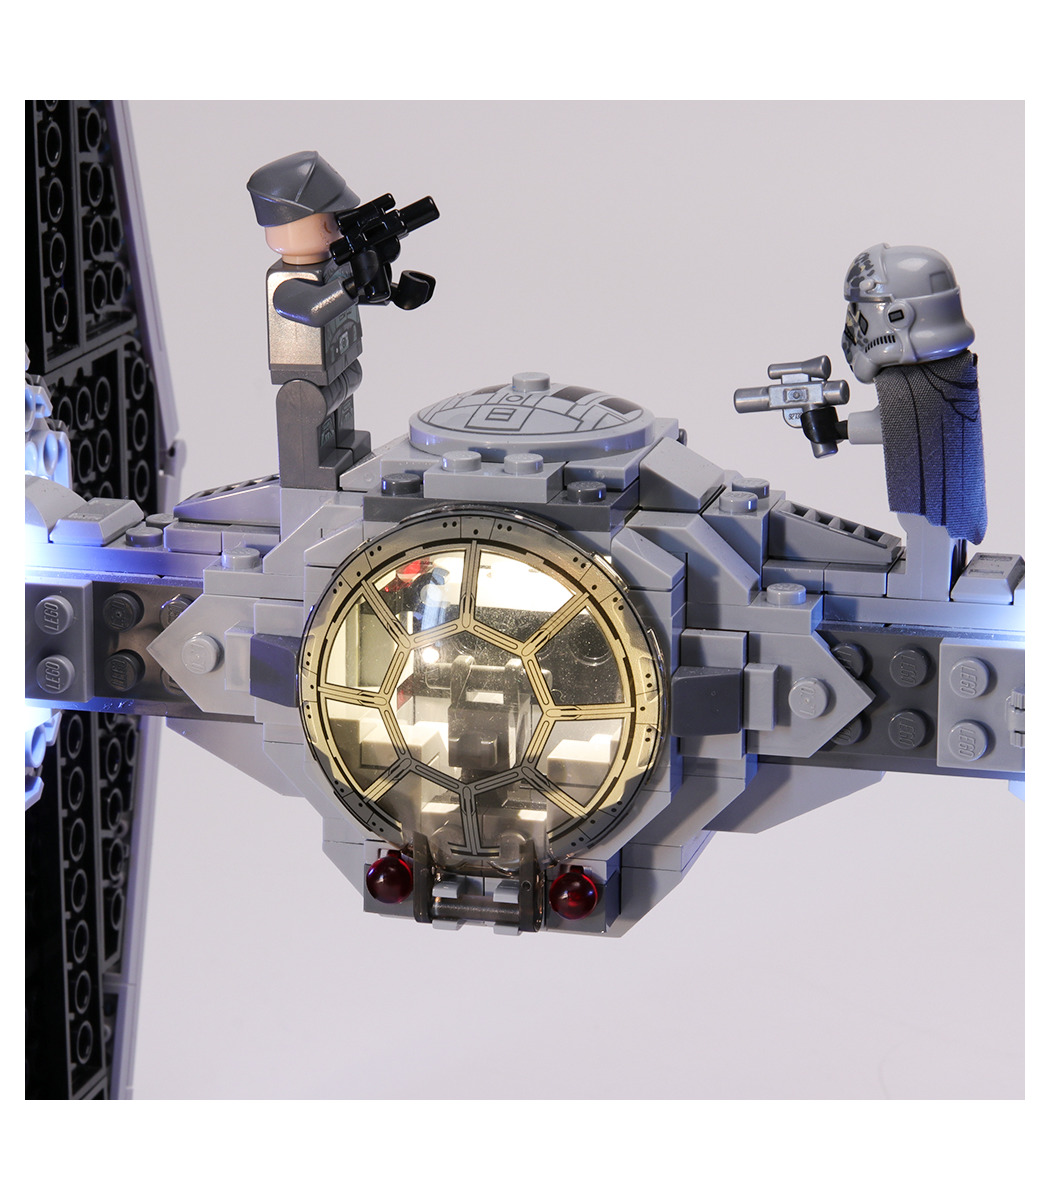 Support Lego 75211 Imperial Tie Fighter – Accessoires-Figurines